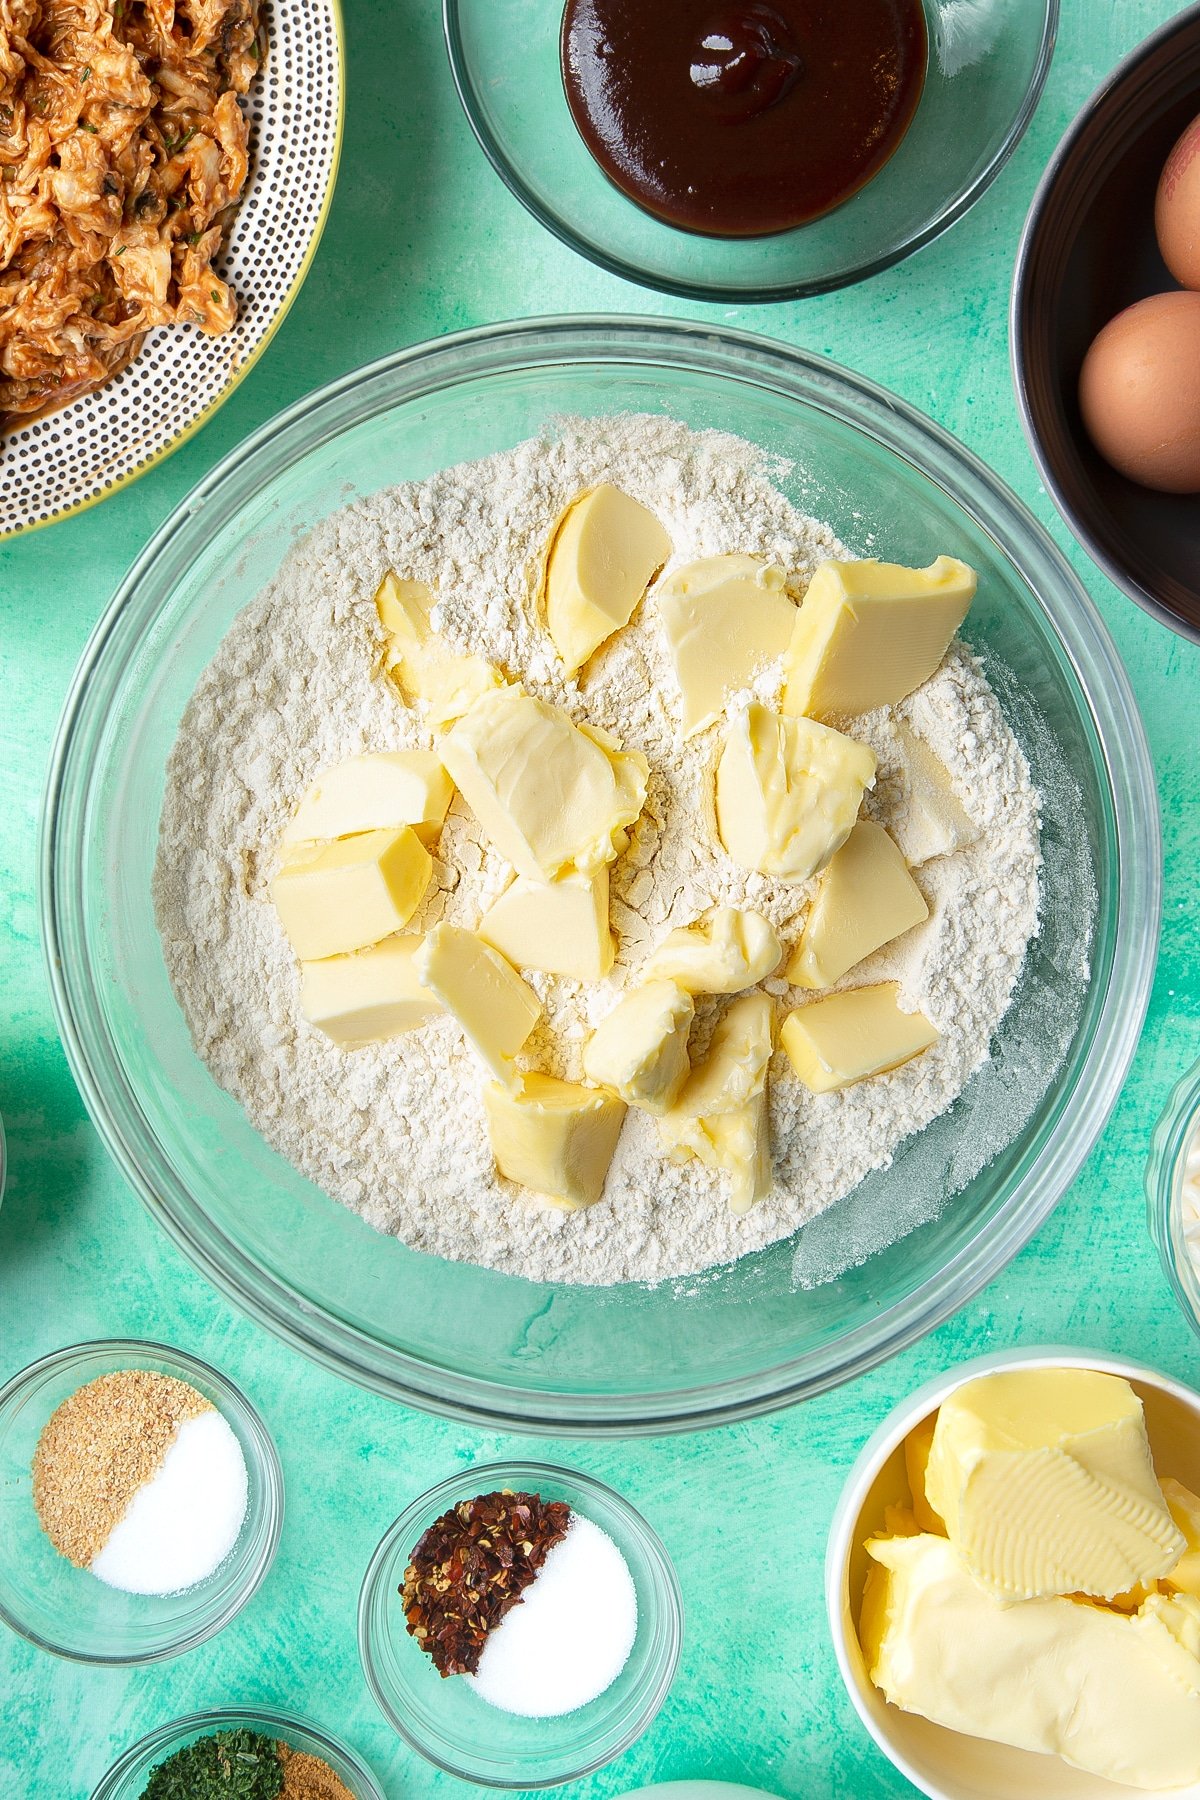 Flour and butter in a glass mixing bowl. Ingredients to make chicken doughnuts surround the bowl.